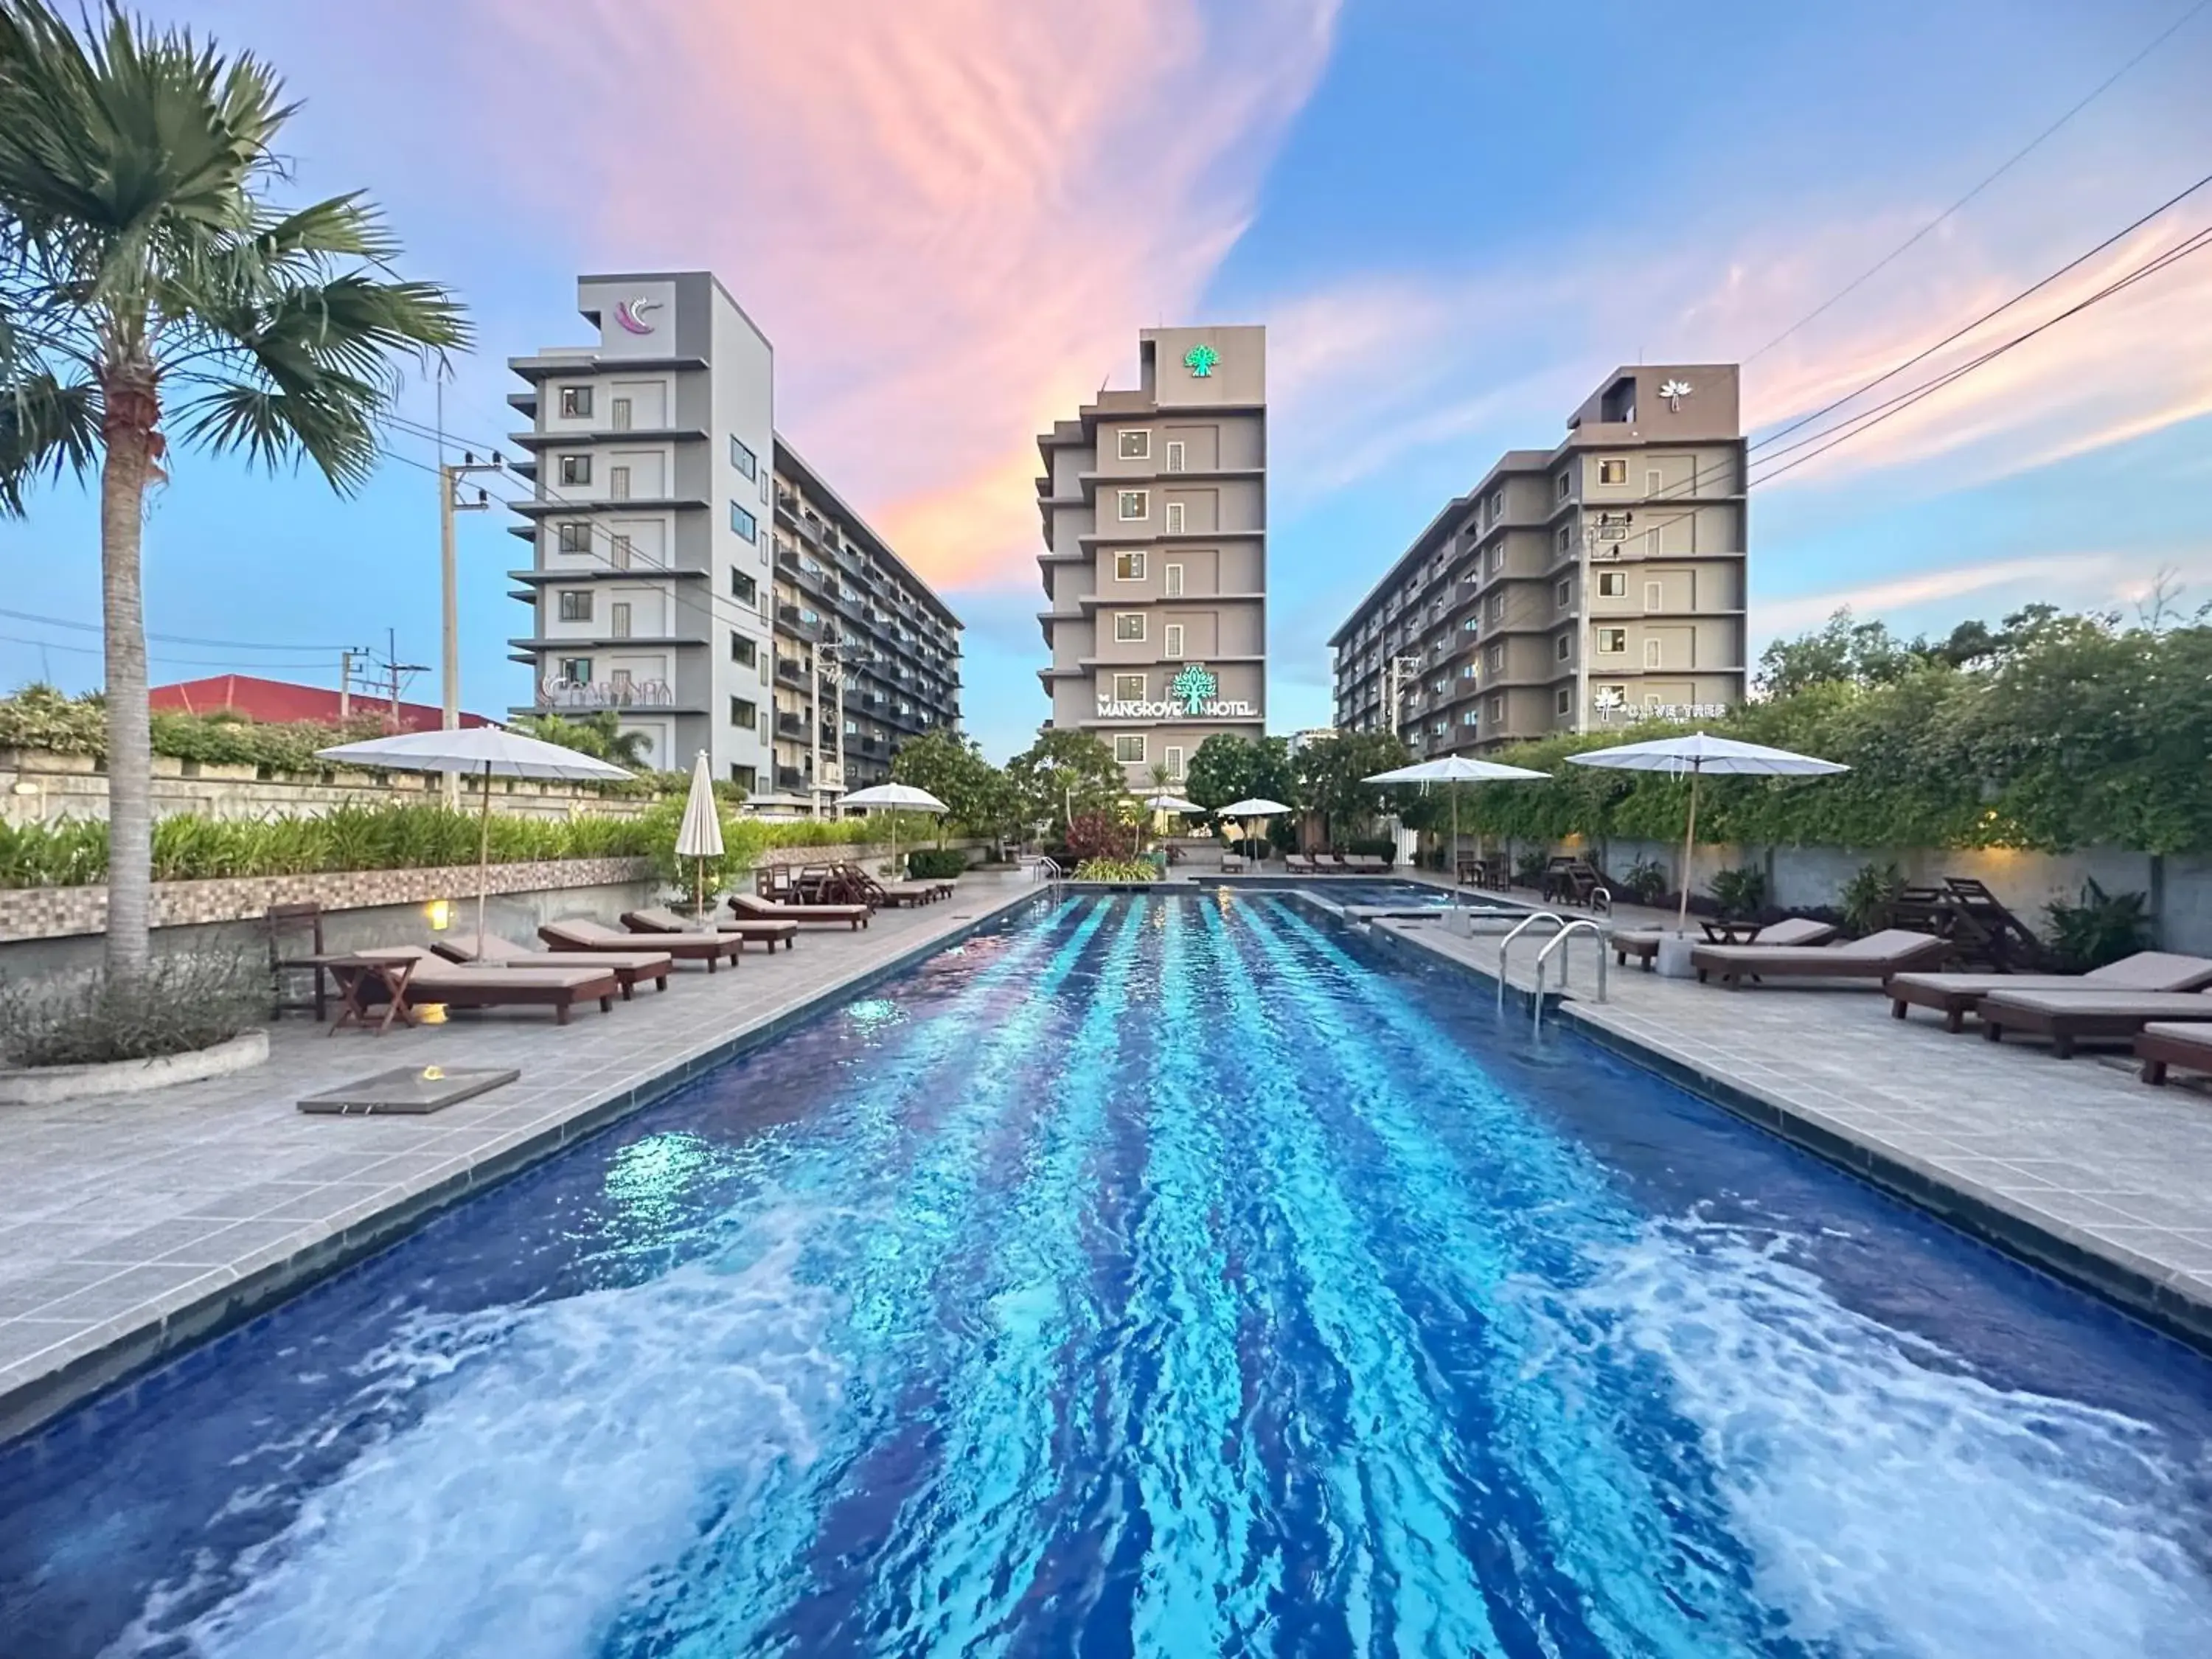 Property building, Swimming Pool in The Mangrove Hotel